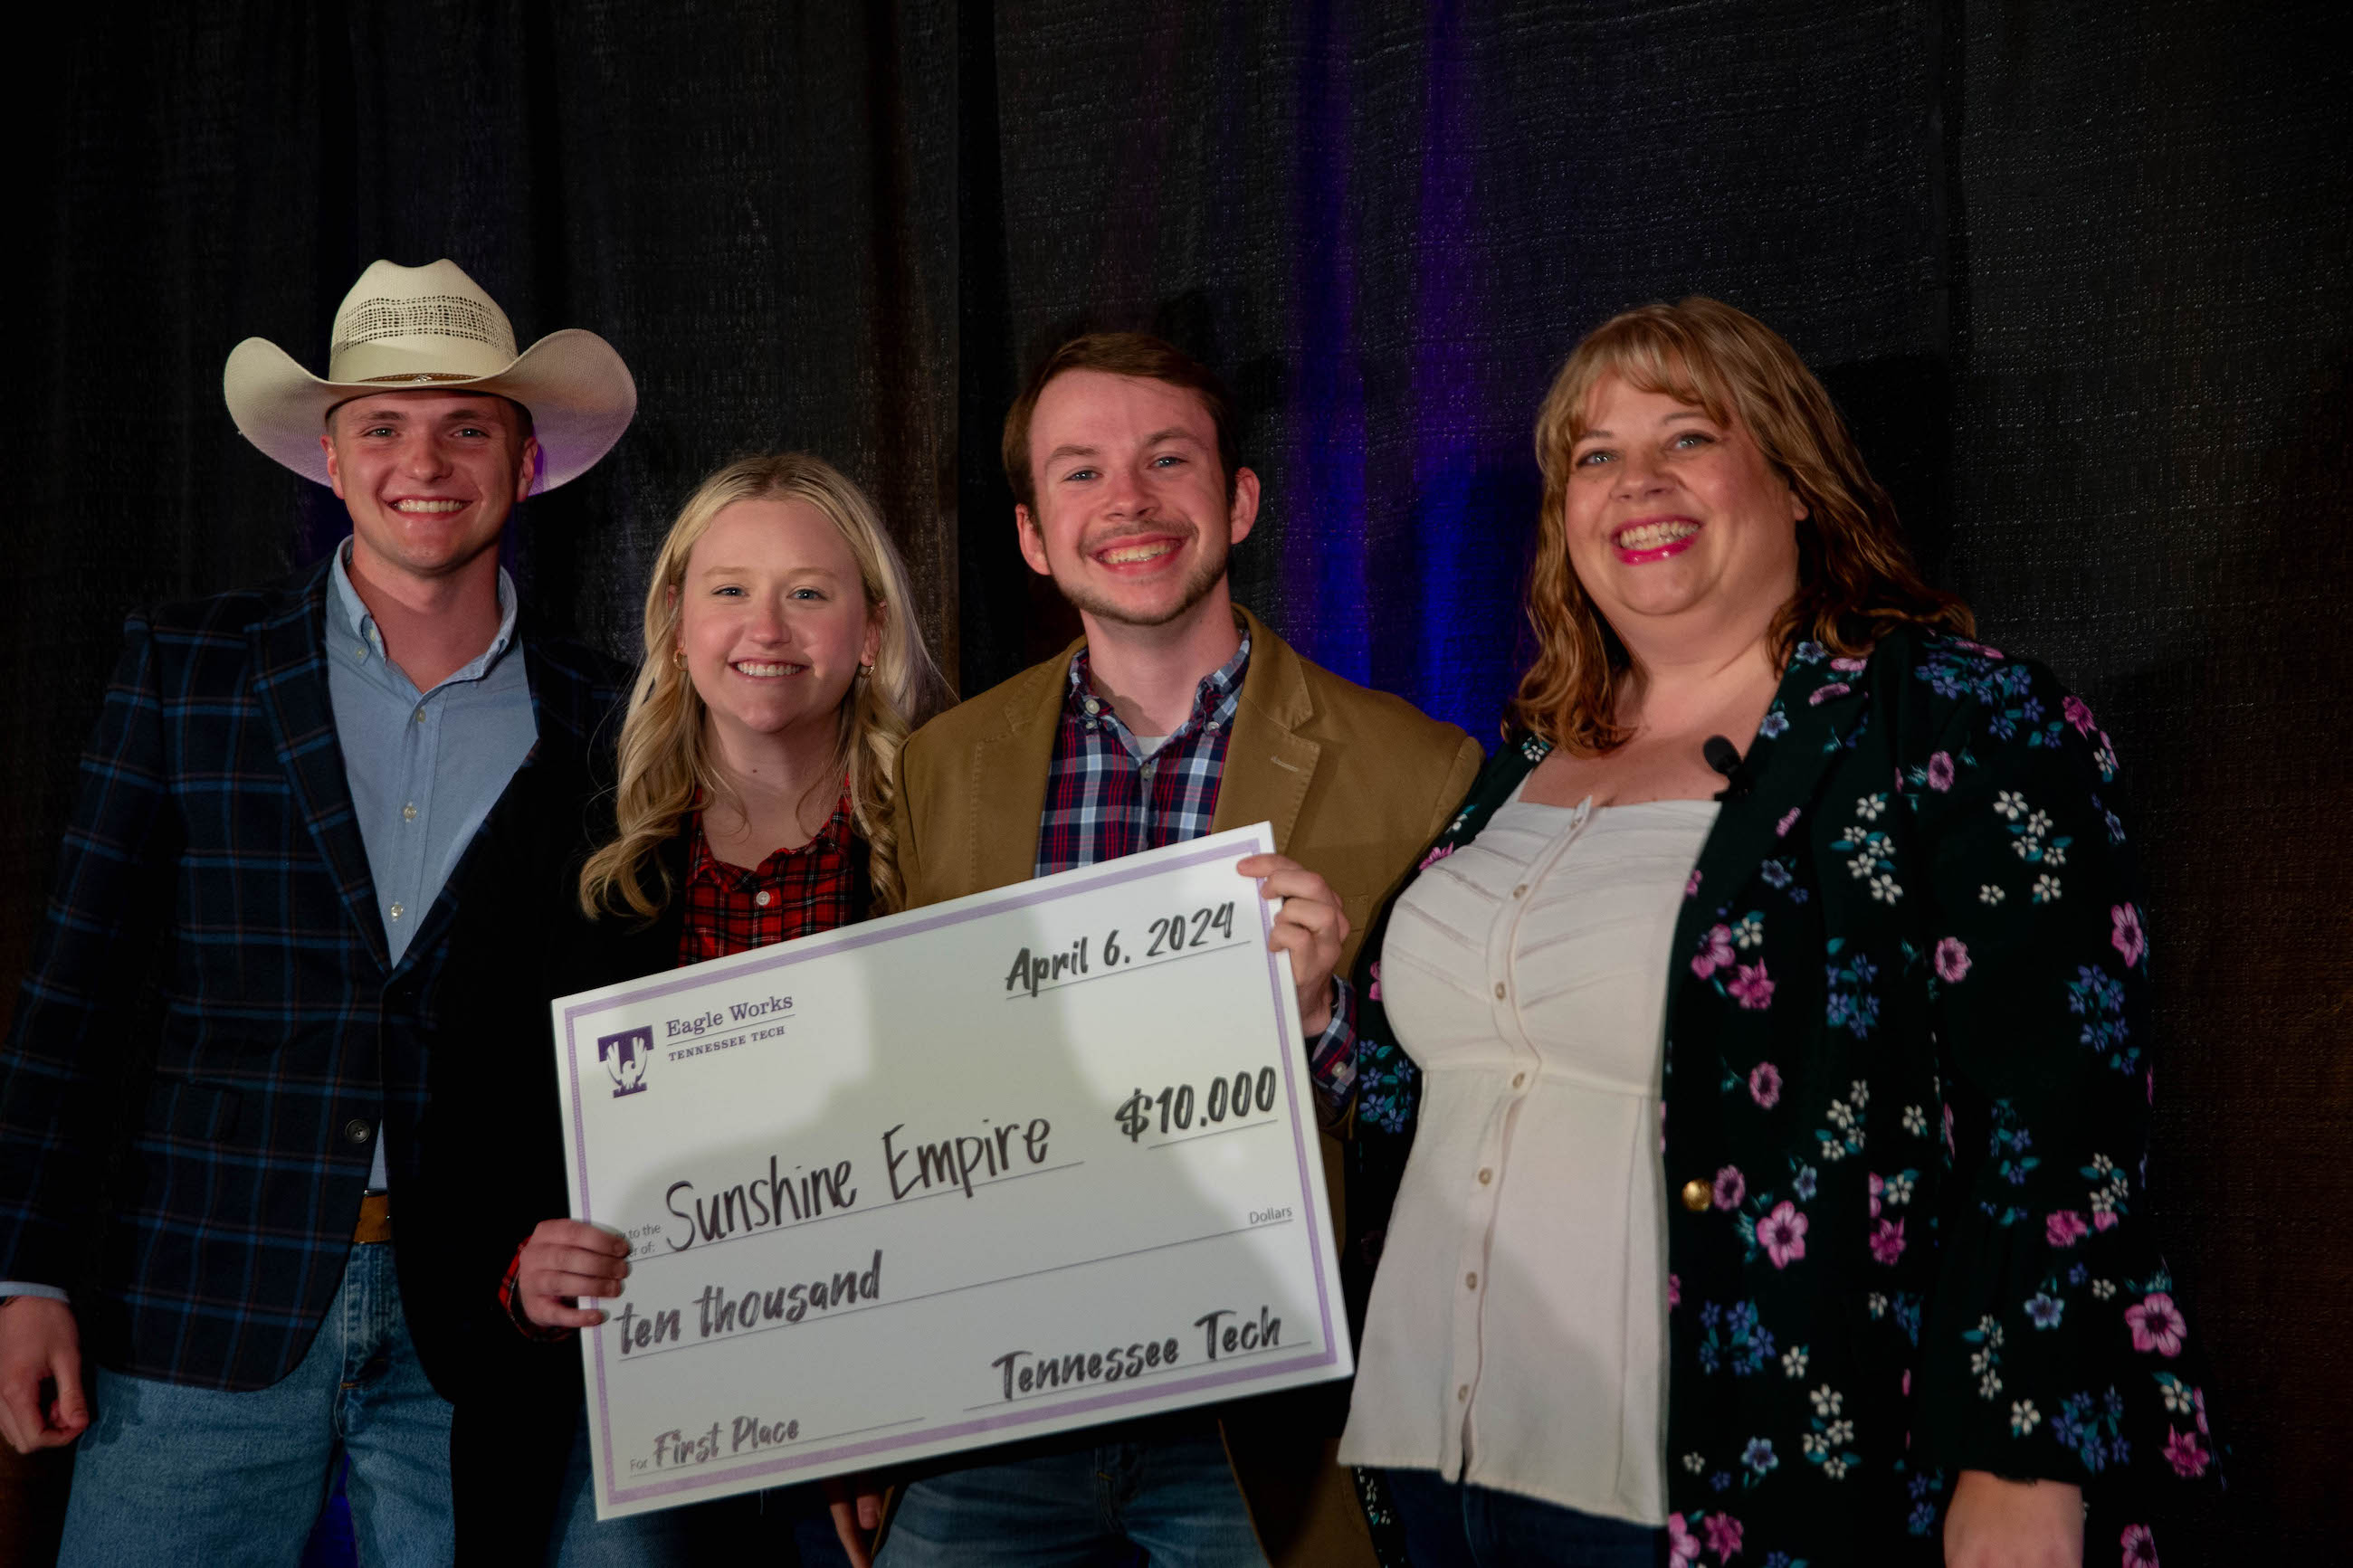 From left: Tech students Porter Davison, Addison Dorris, and Riley Bishop pose with their $10,000 first place scholarship prize alongside Eagle Works manager Andrea Kruszka. Photo credit: Ryan Hall